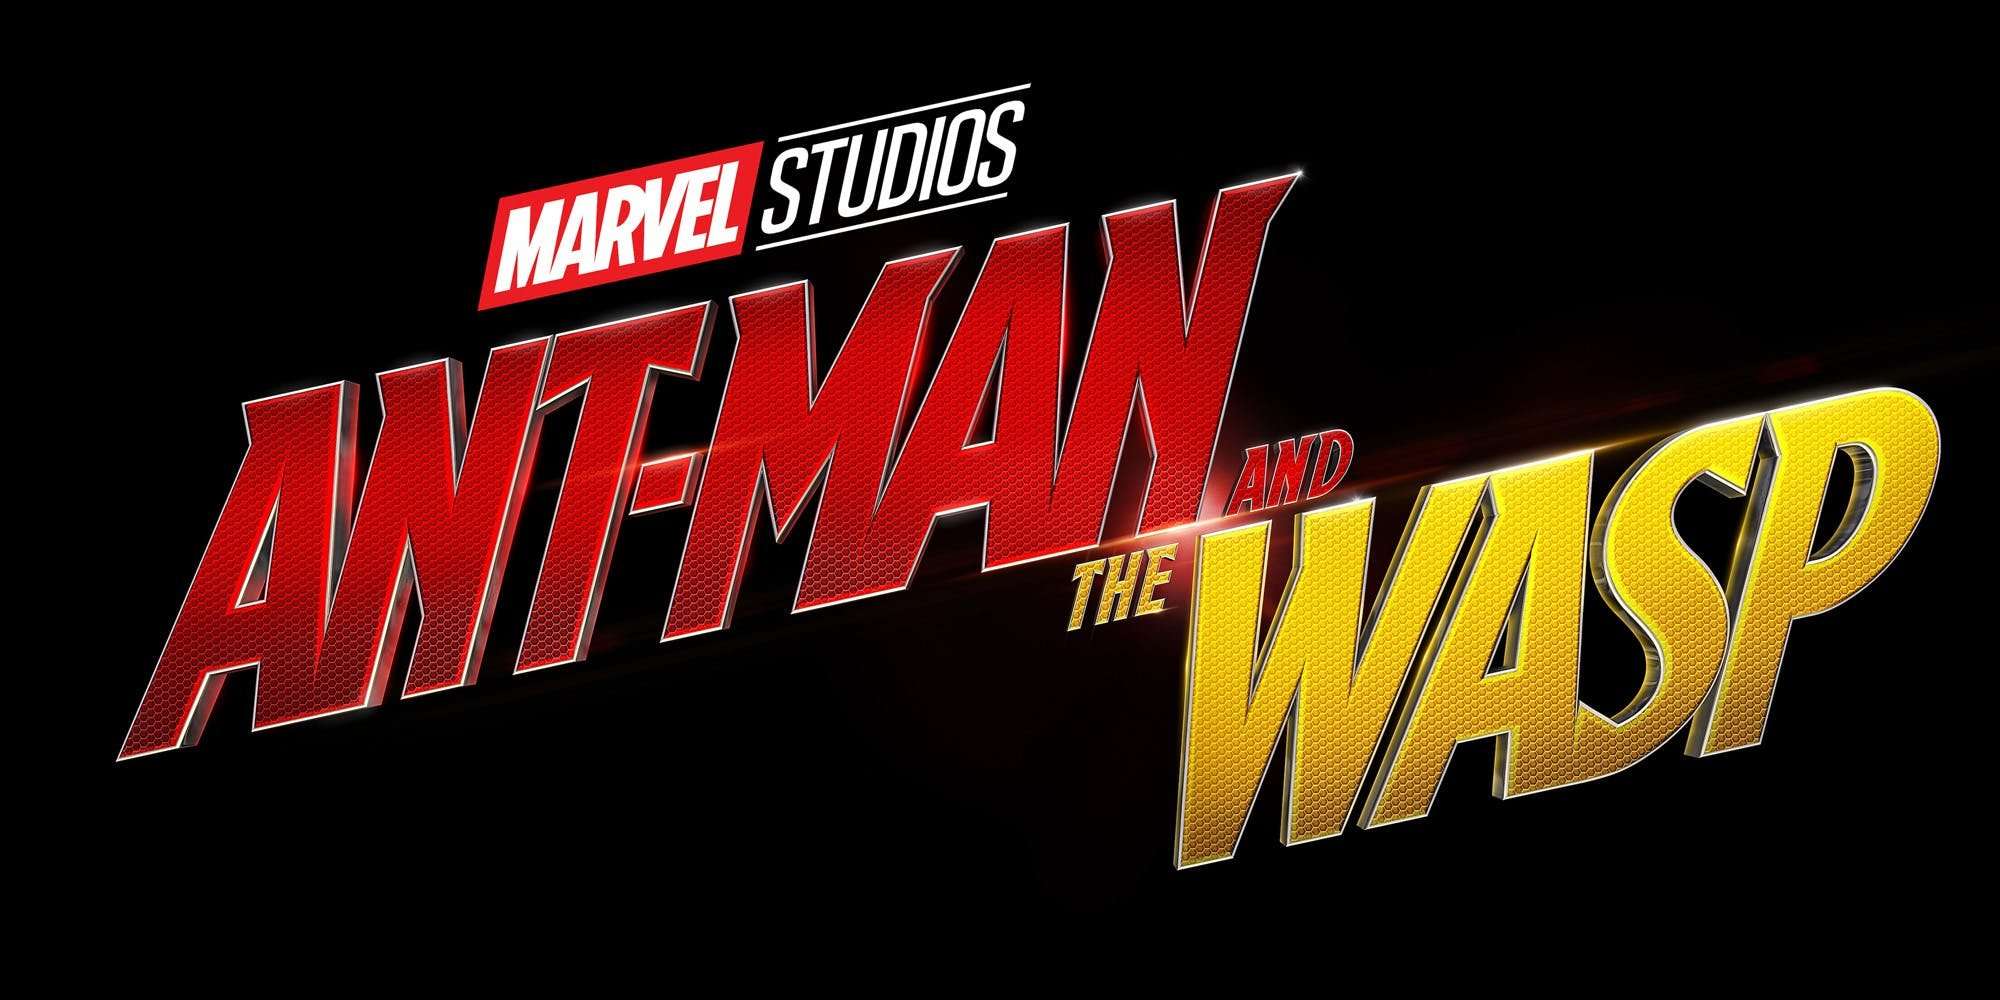 image for Marvel’s Ant-Man and the Wasp Wraps Production